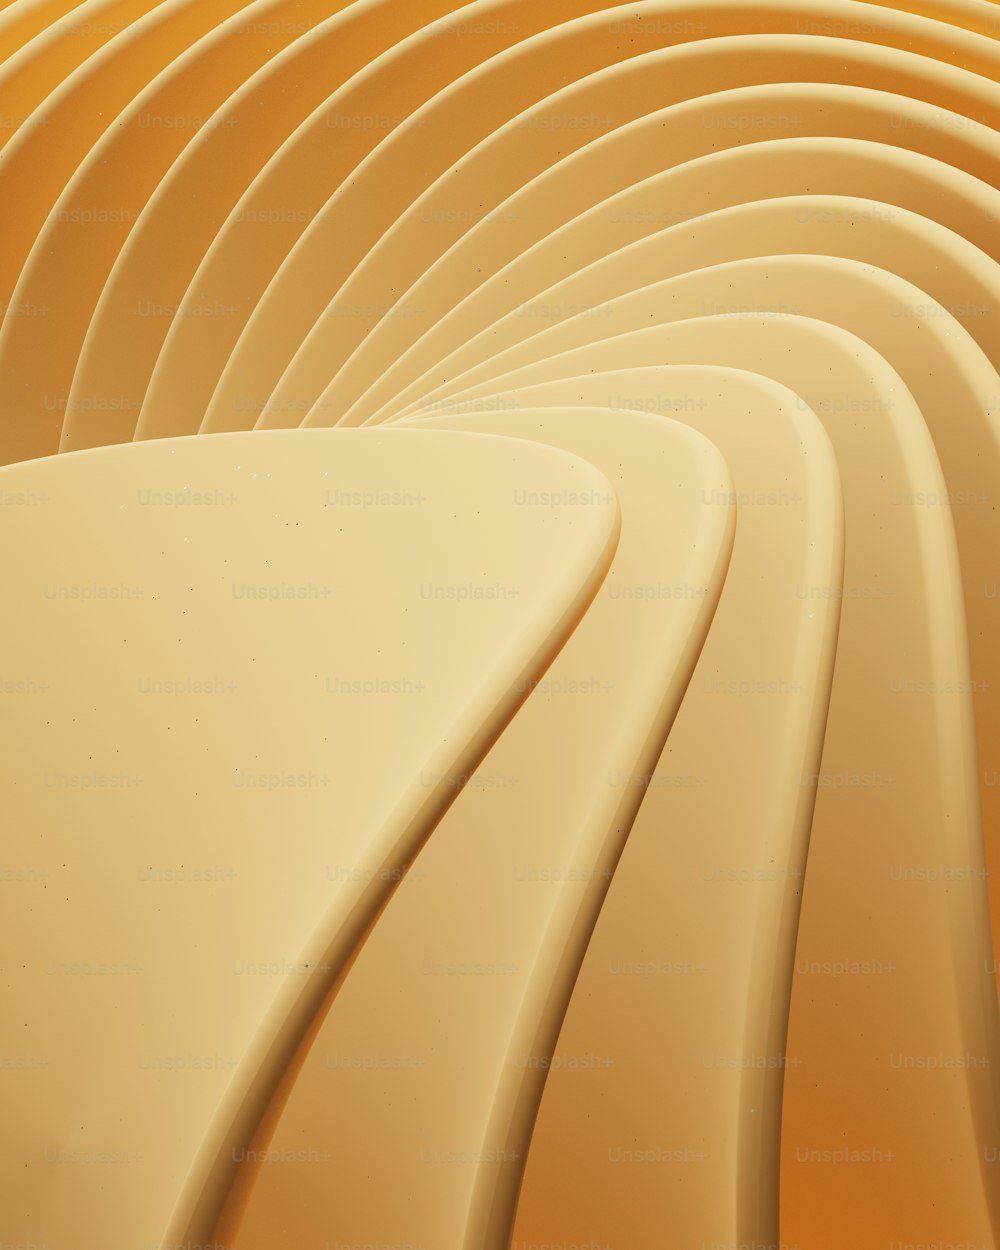 an abstract image of wavy lines in yellow